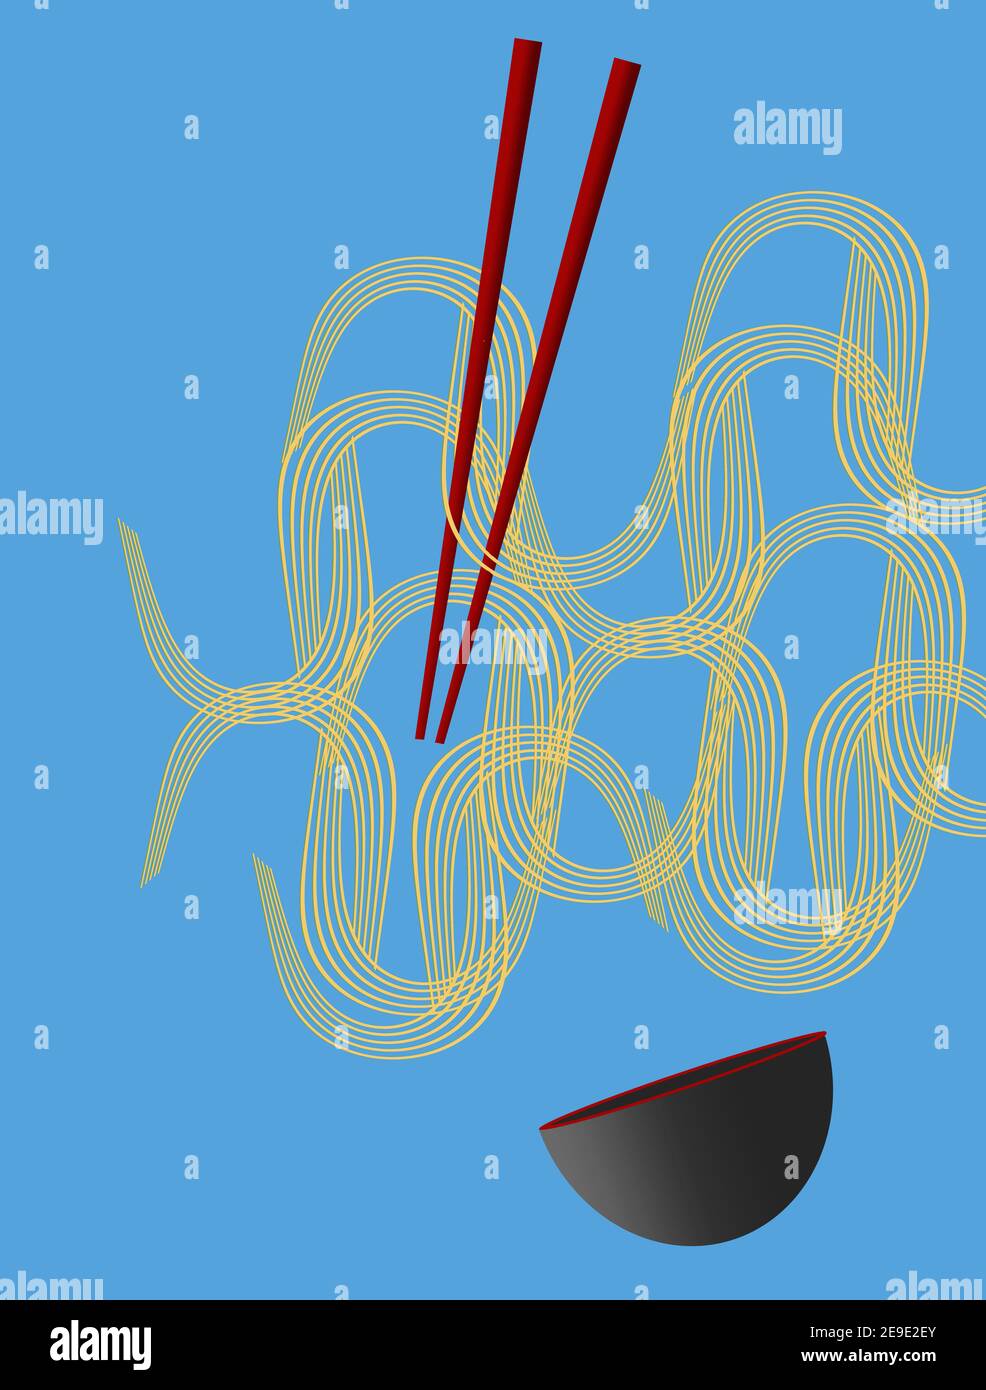 Noodles, waves of noodles, red chopsticks and a black and red  bowl are seen isolated on a blue background. Stock Photo